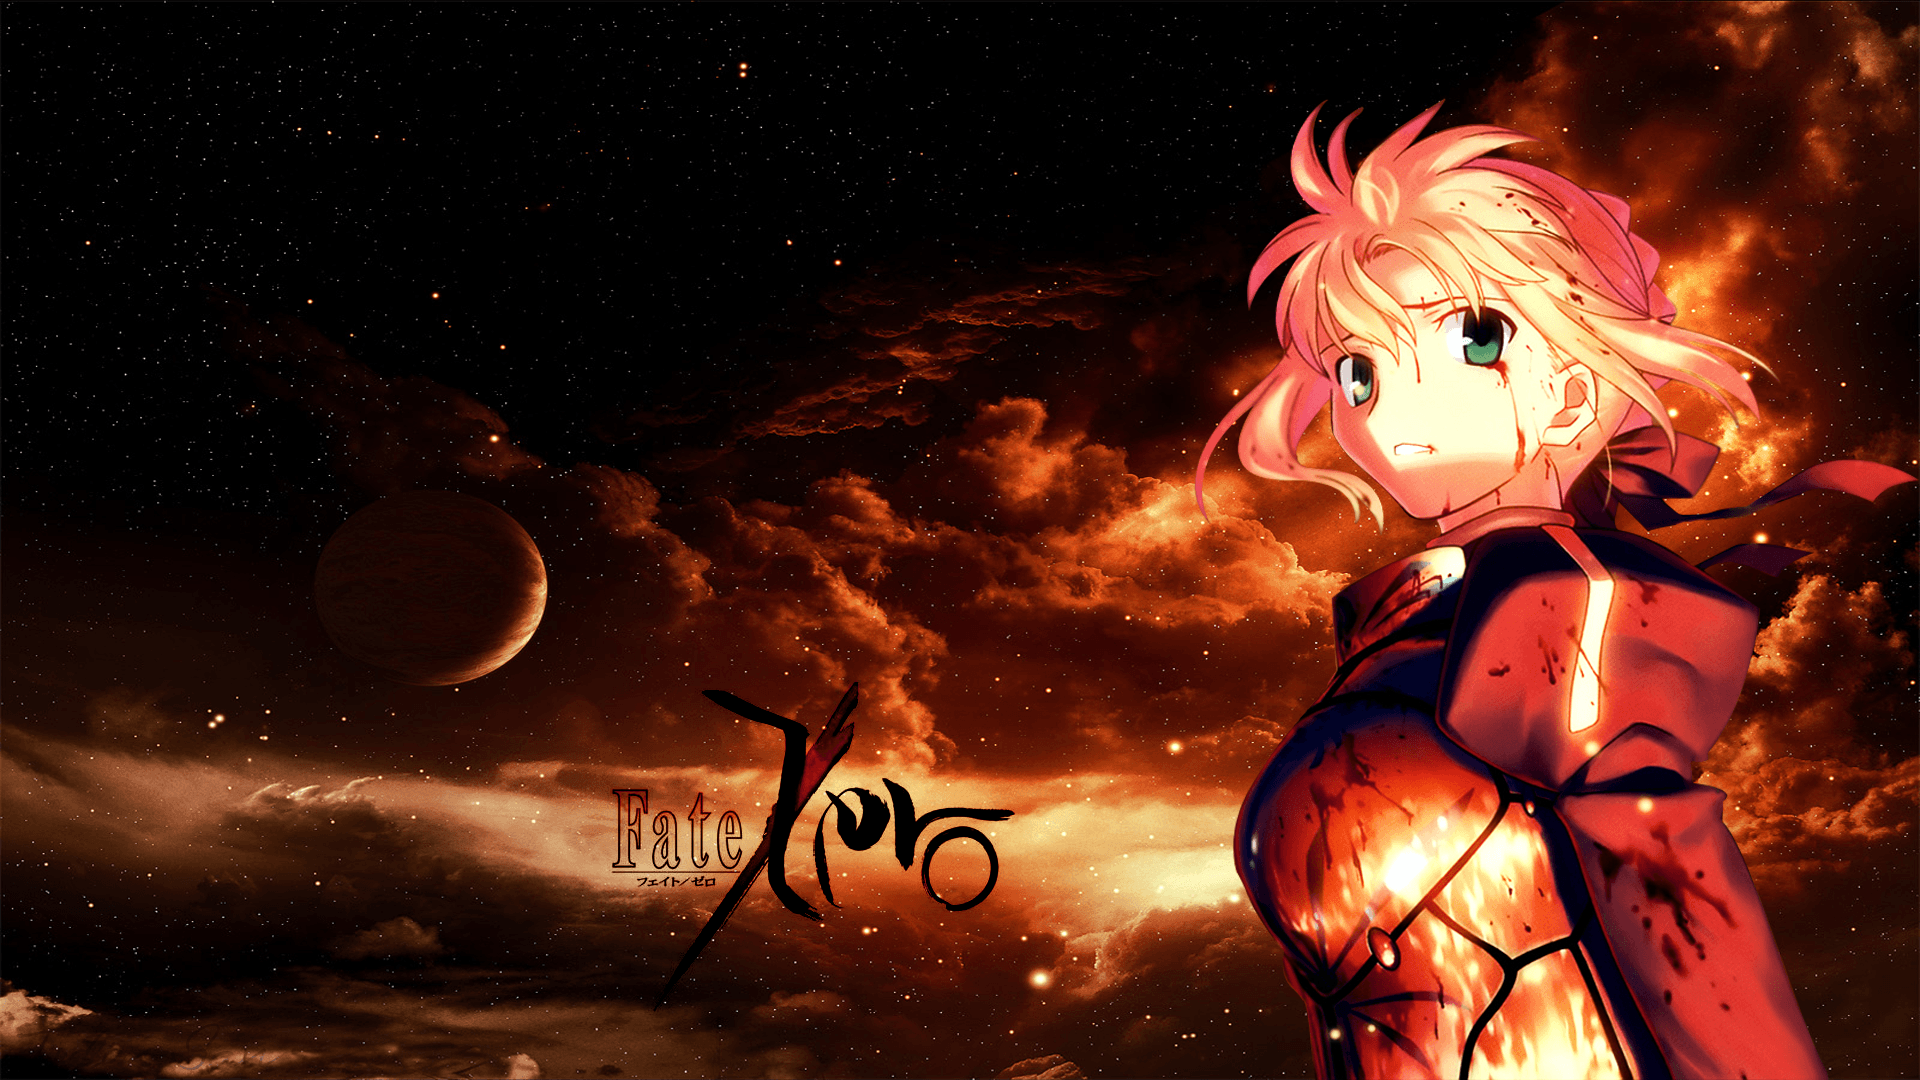 Fate Zero Saber Wallpapers.